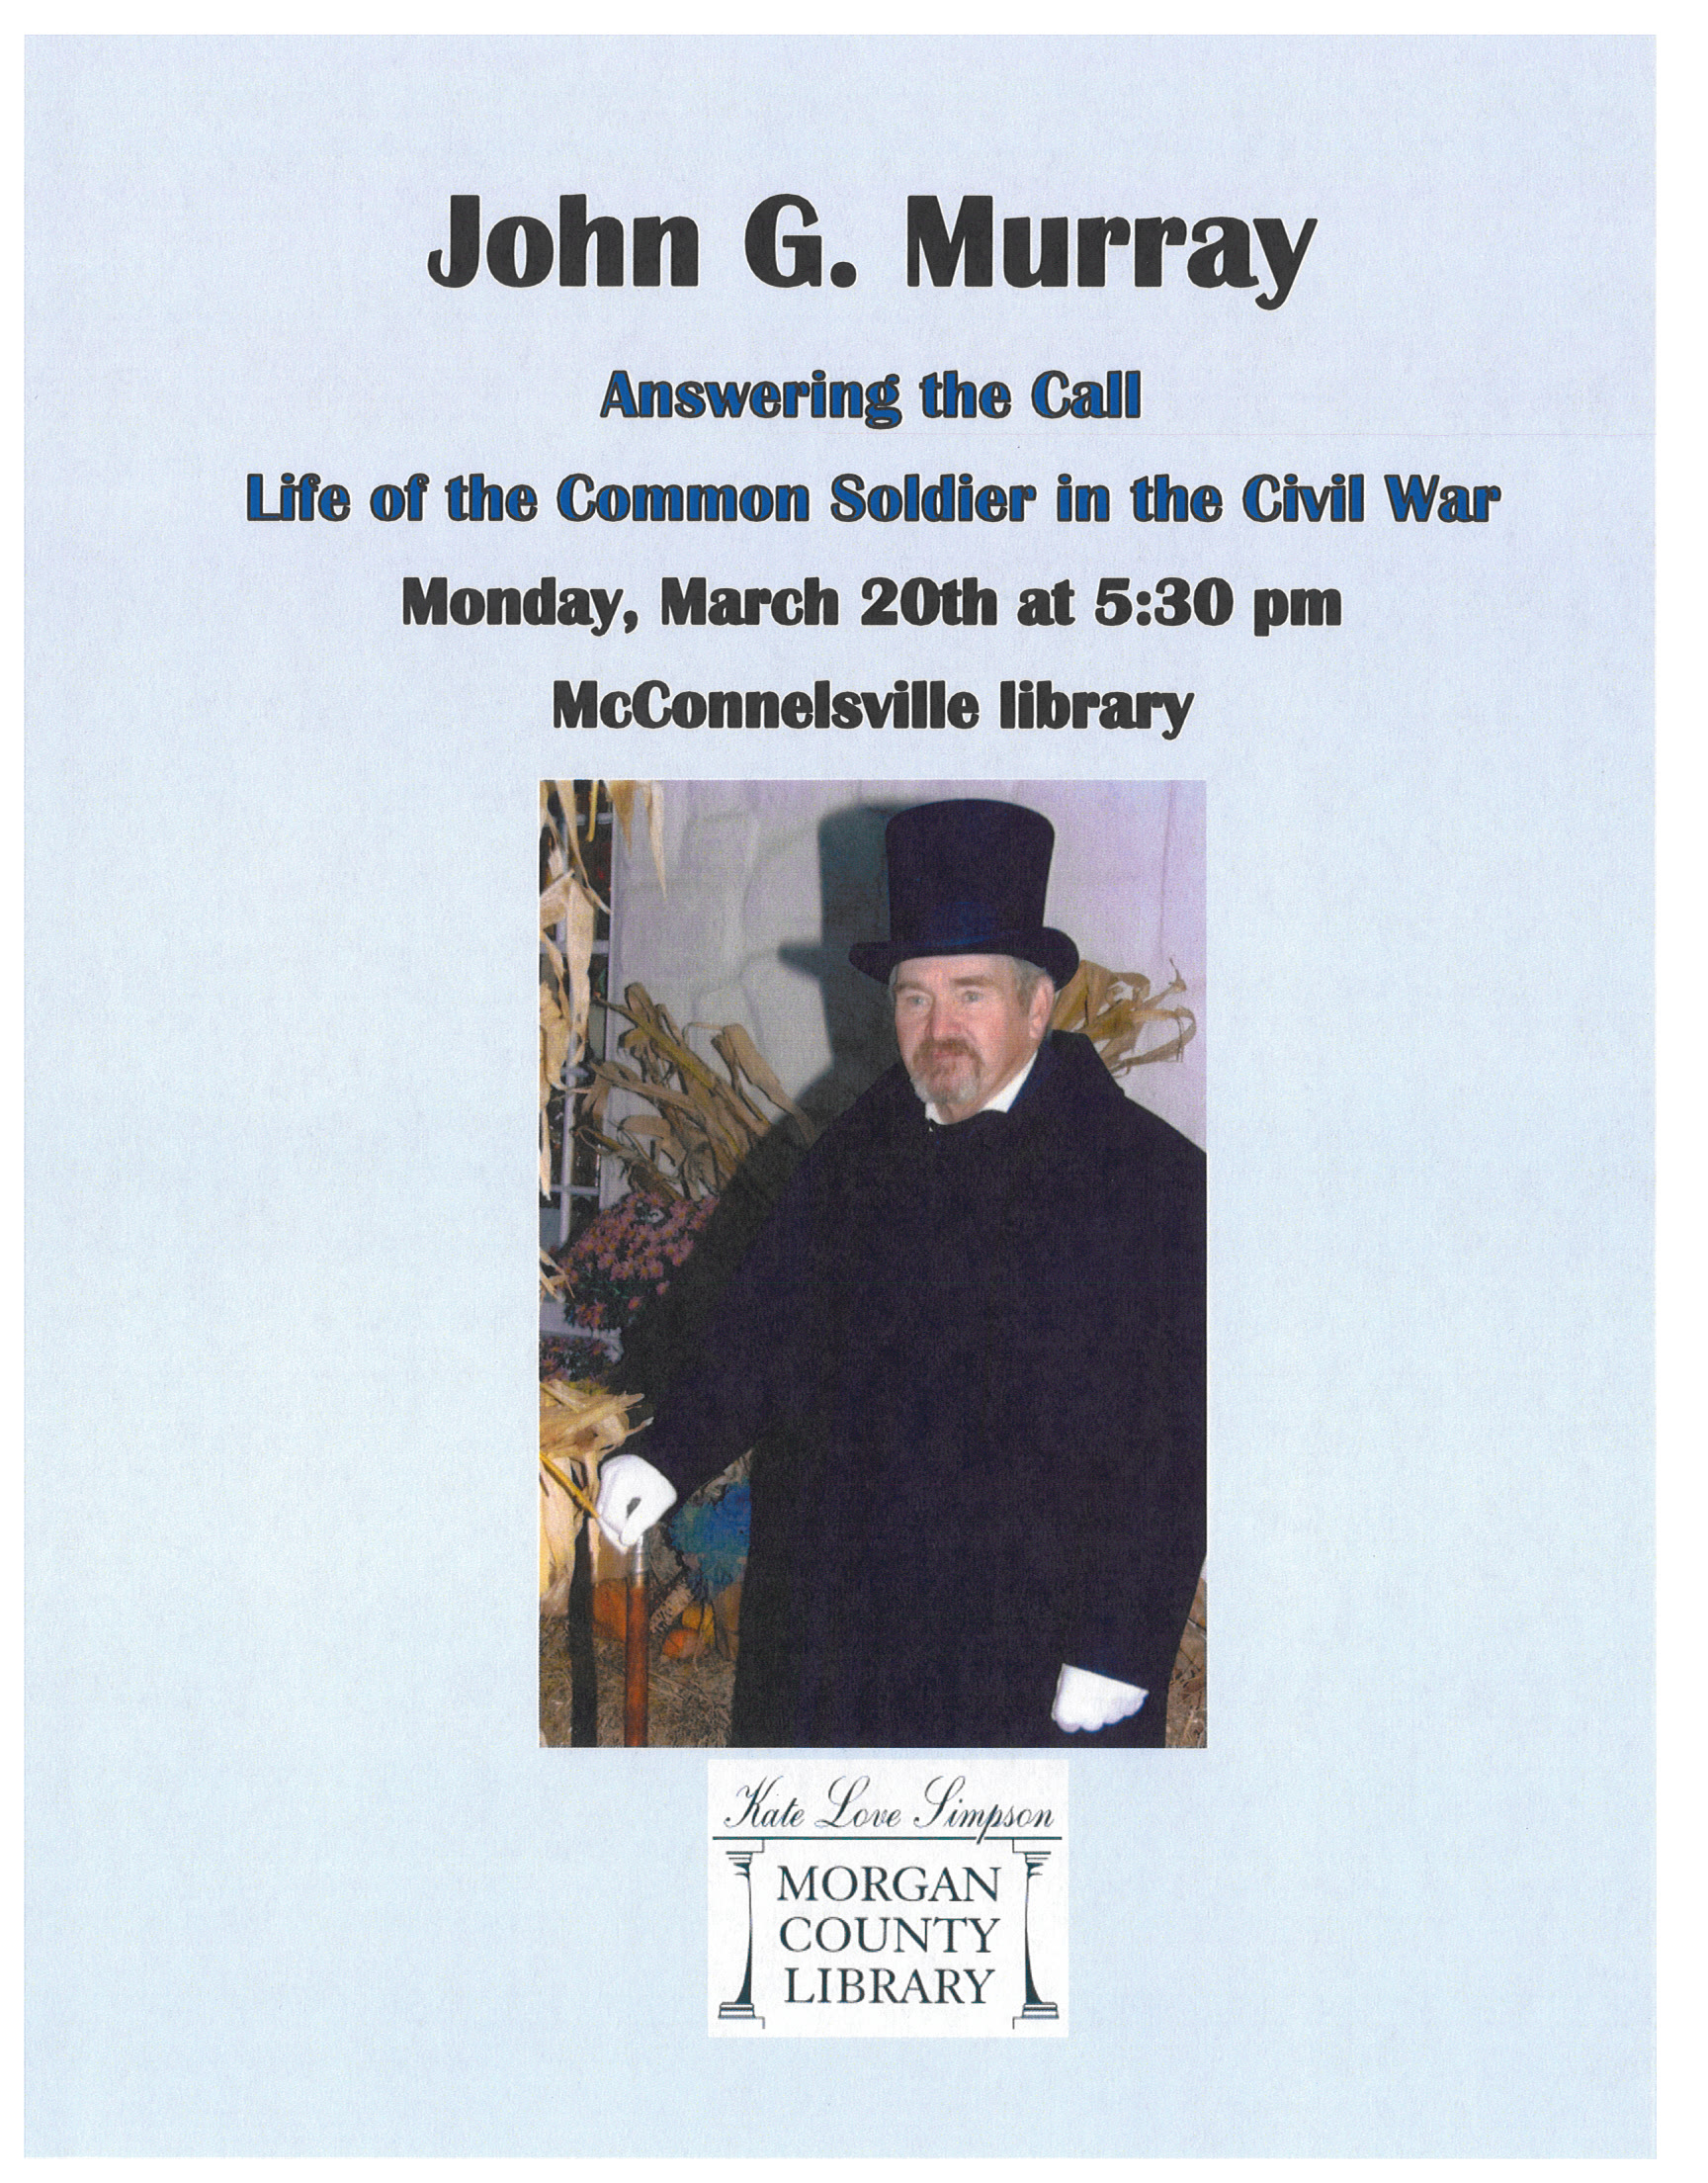 A flyer that reads: John G. Murray Answering the Call Life of the Common Soldier in the Civil War Monday March 20 at 5:30pm McConnellsville Library. There is a picture of a man in black with a black top hat.